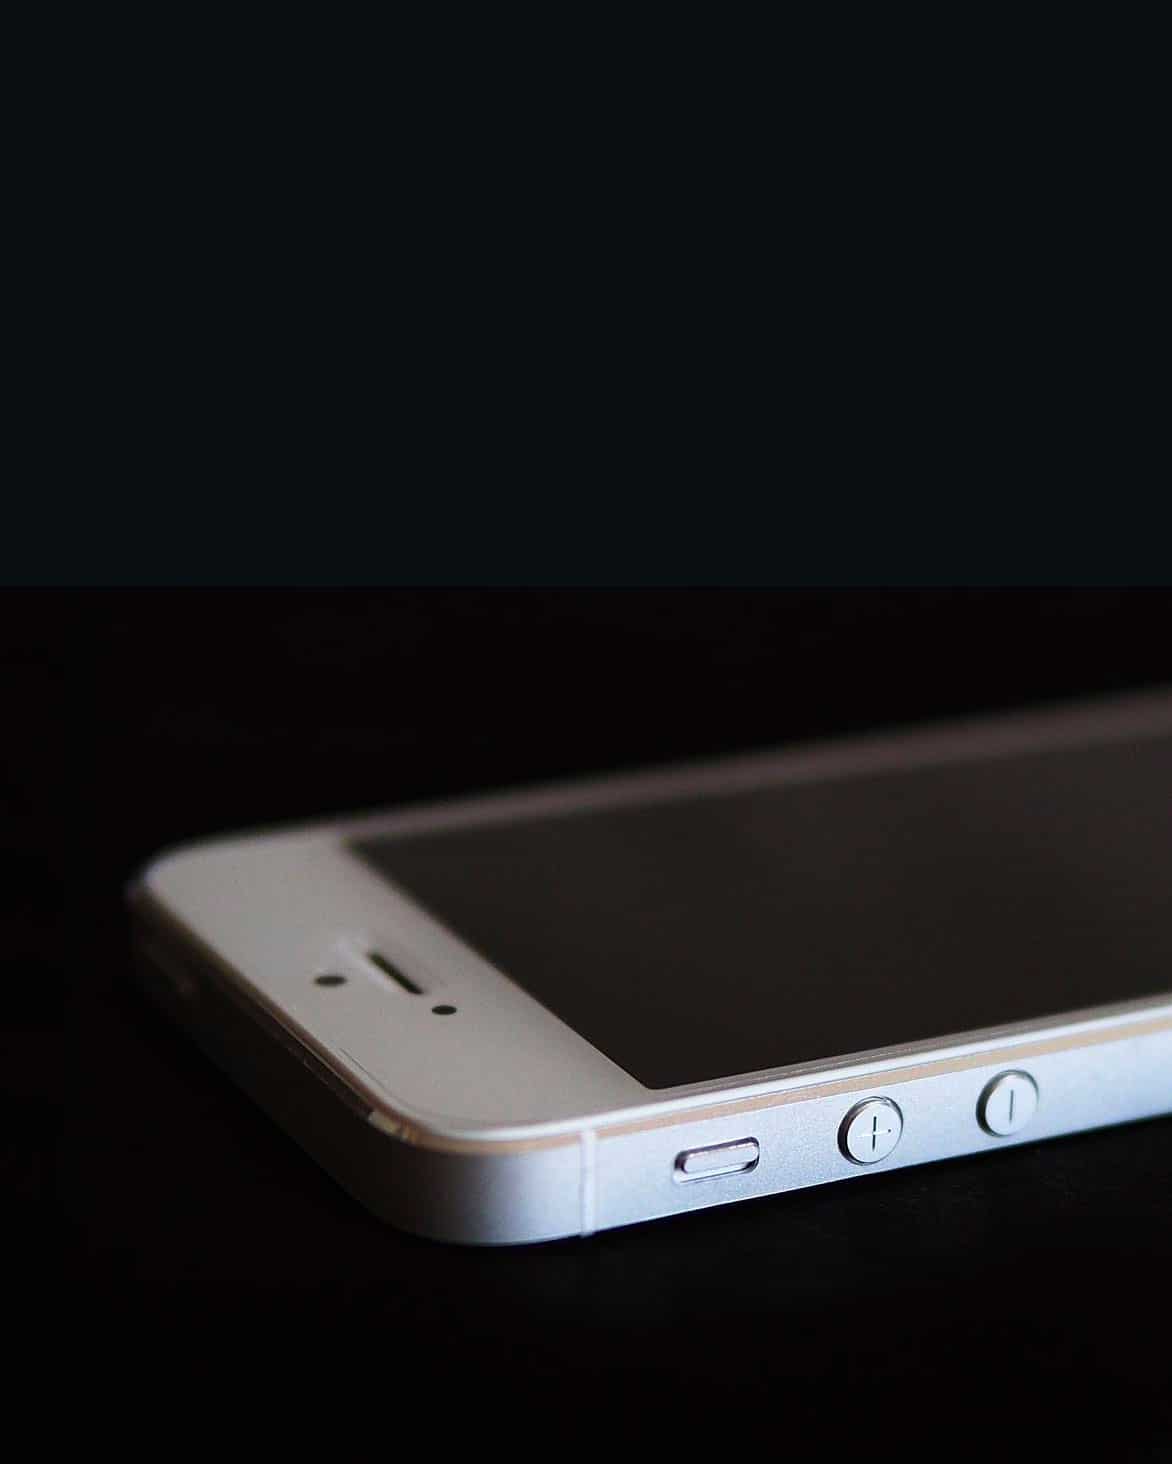 an iPhone 5 on a black background